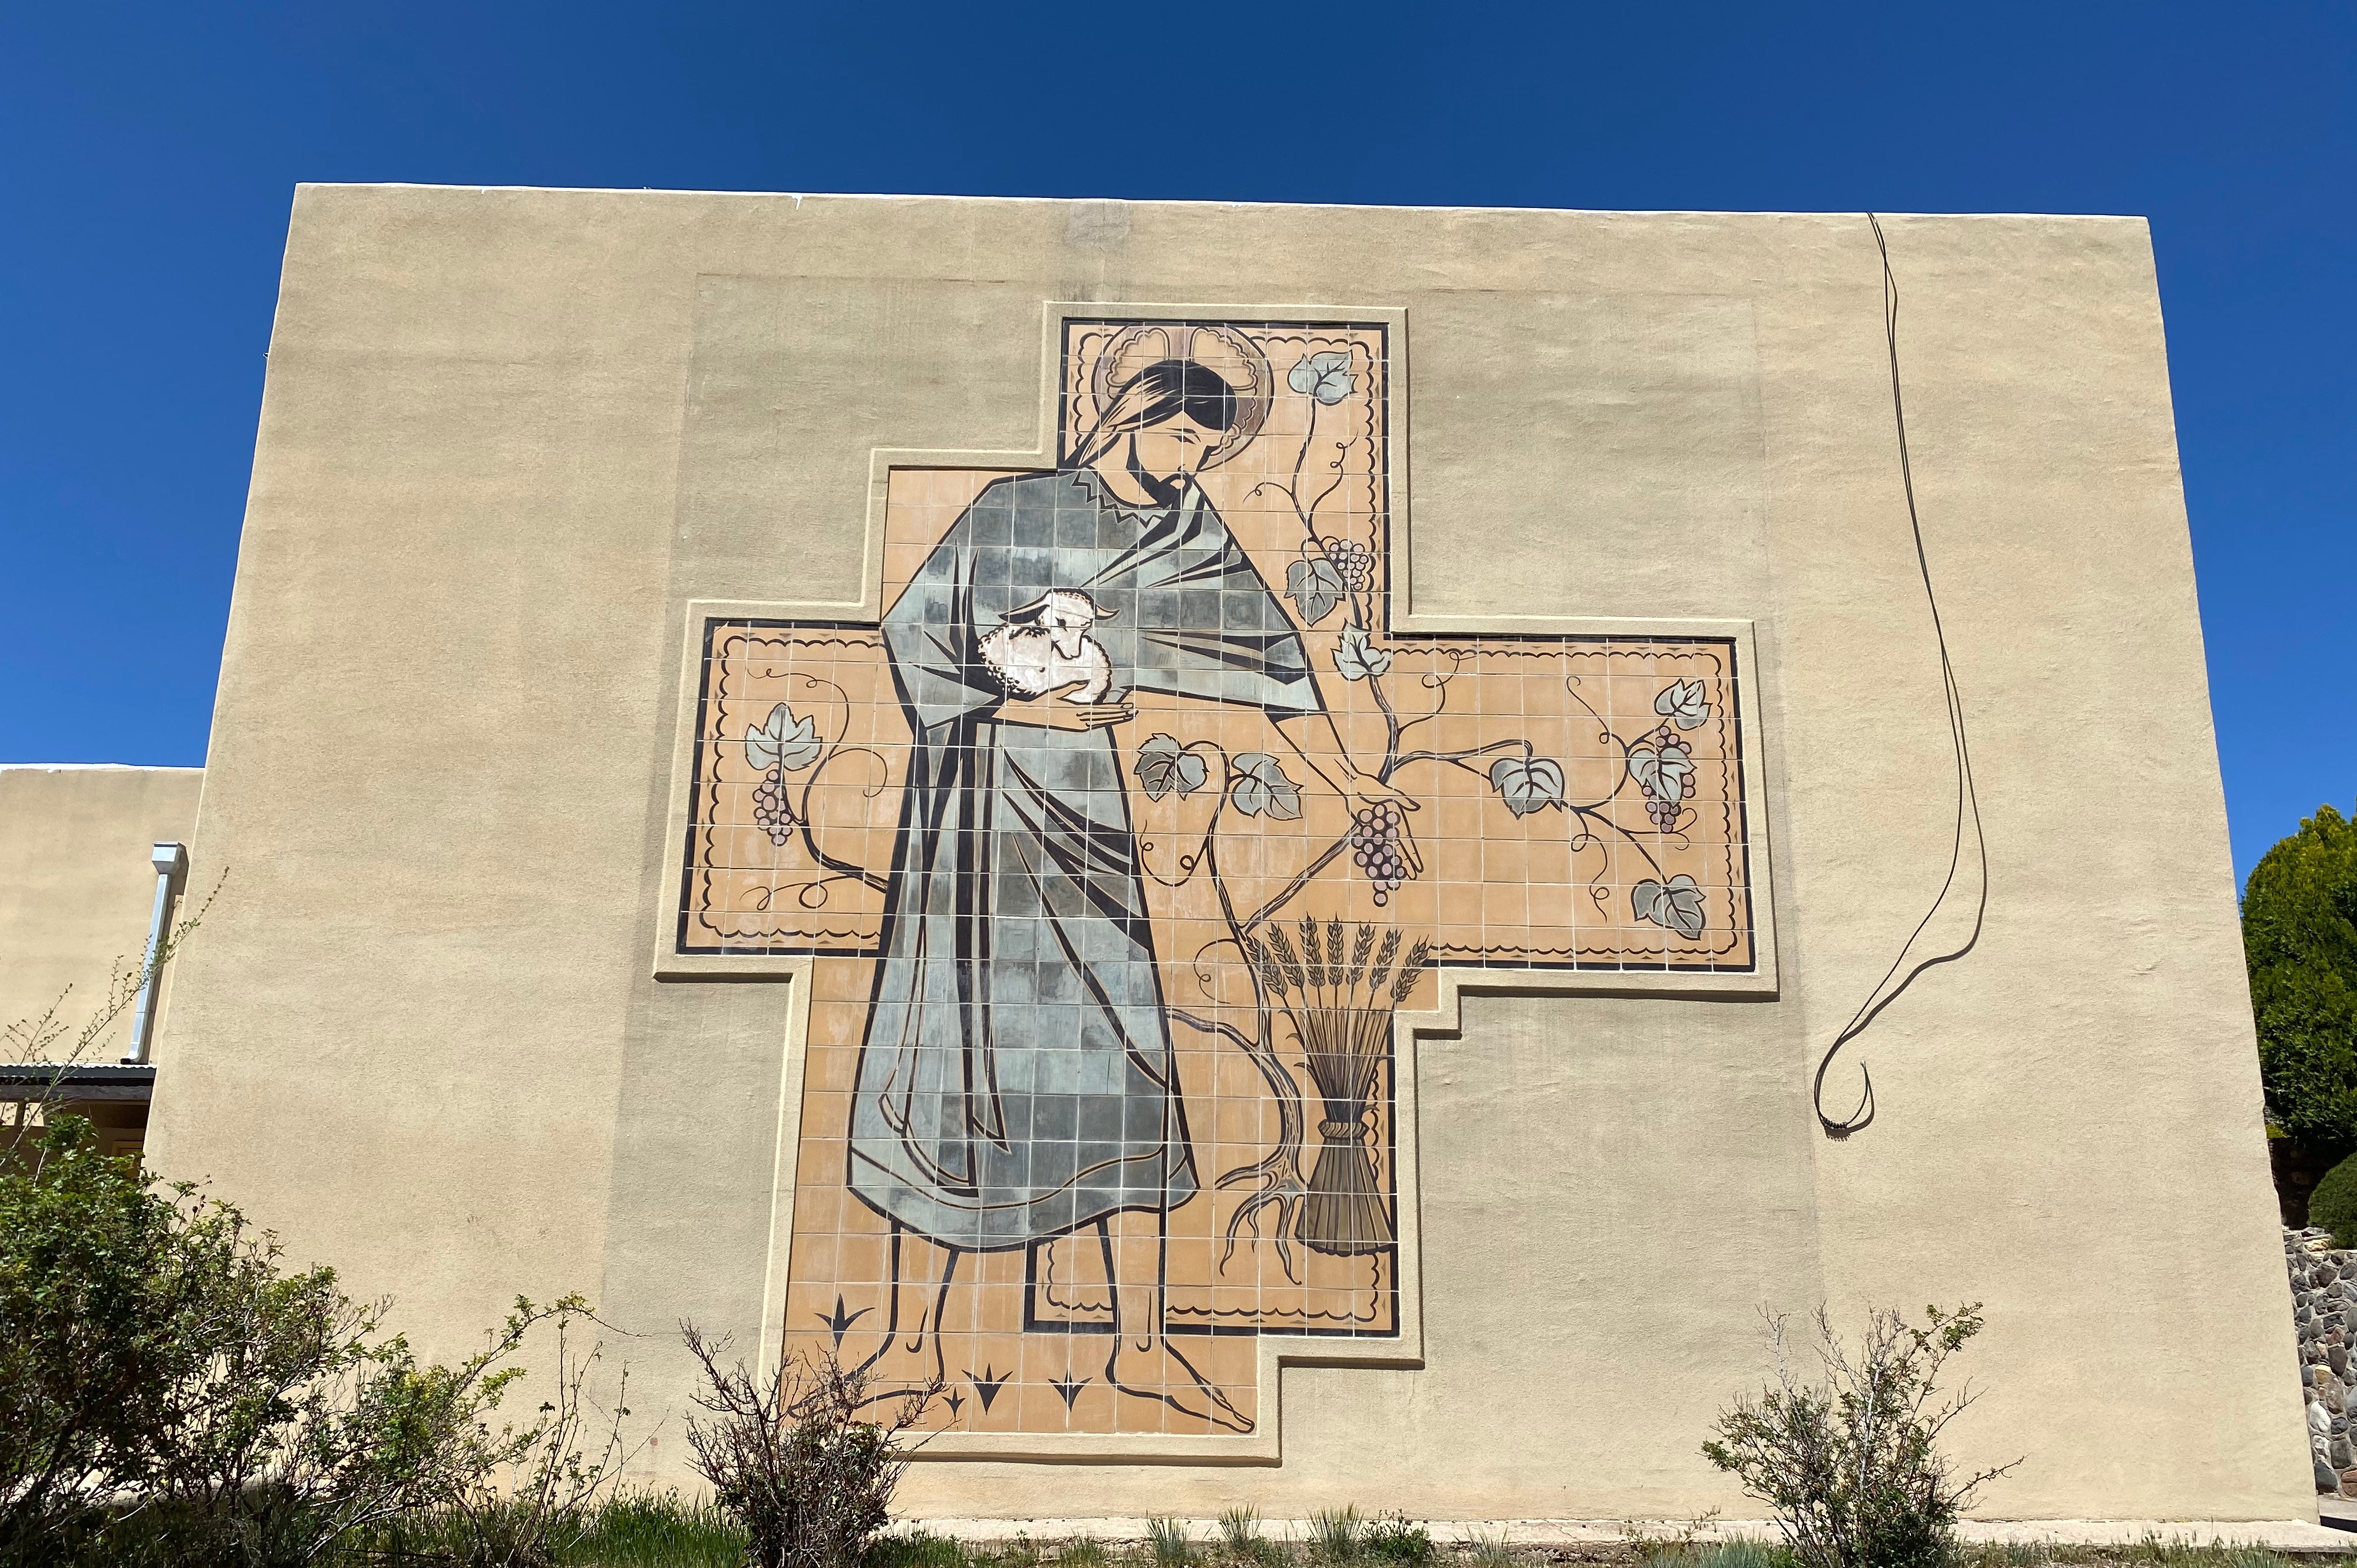 A mural decorates a building once part of the now defunct clergy treatment center operated by the Servants of the Paraclete in Jemez Springs, New Mexico.